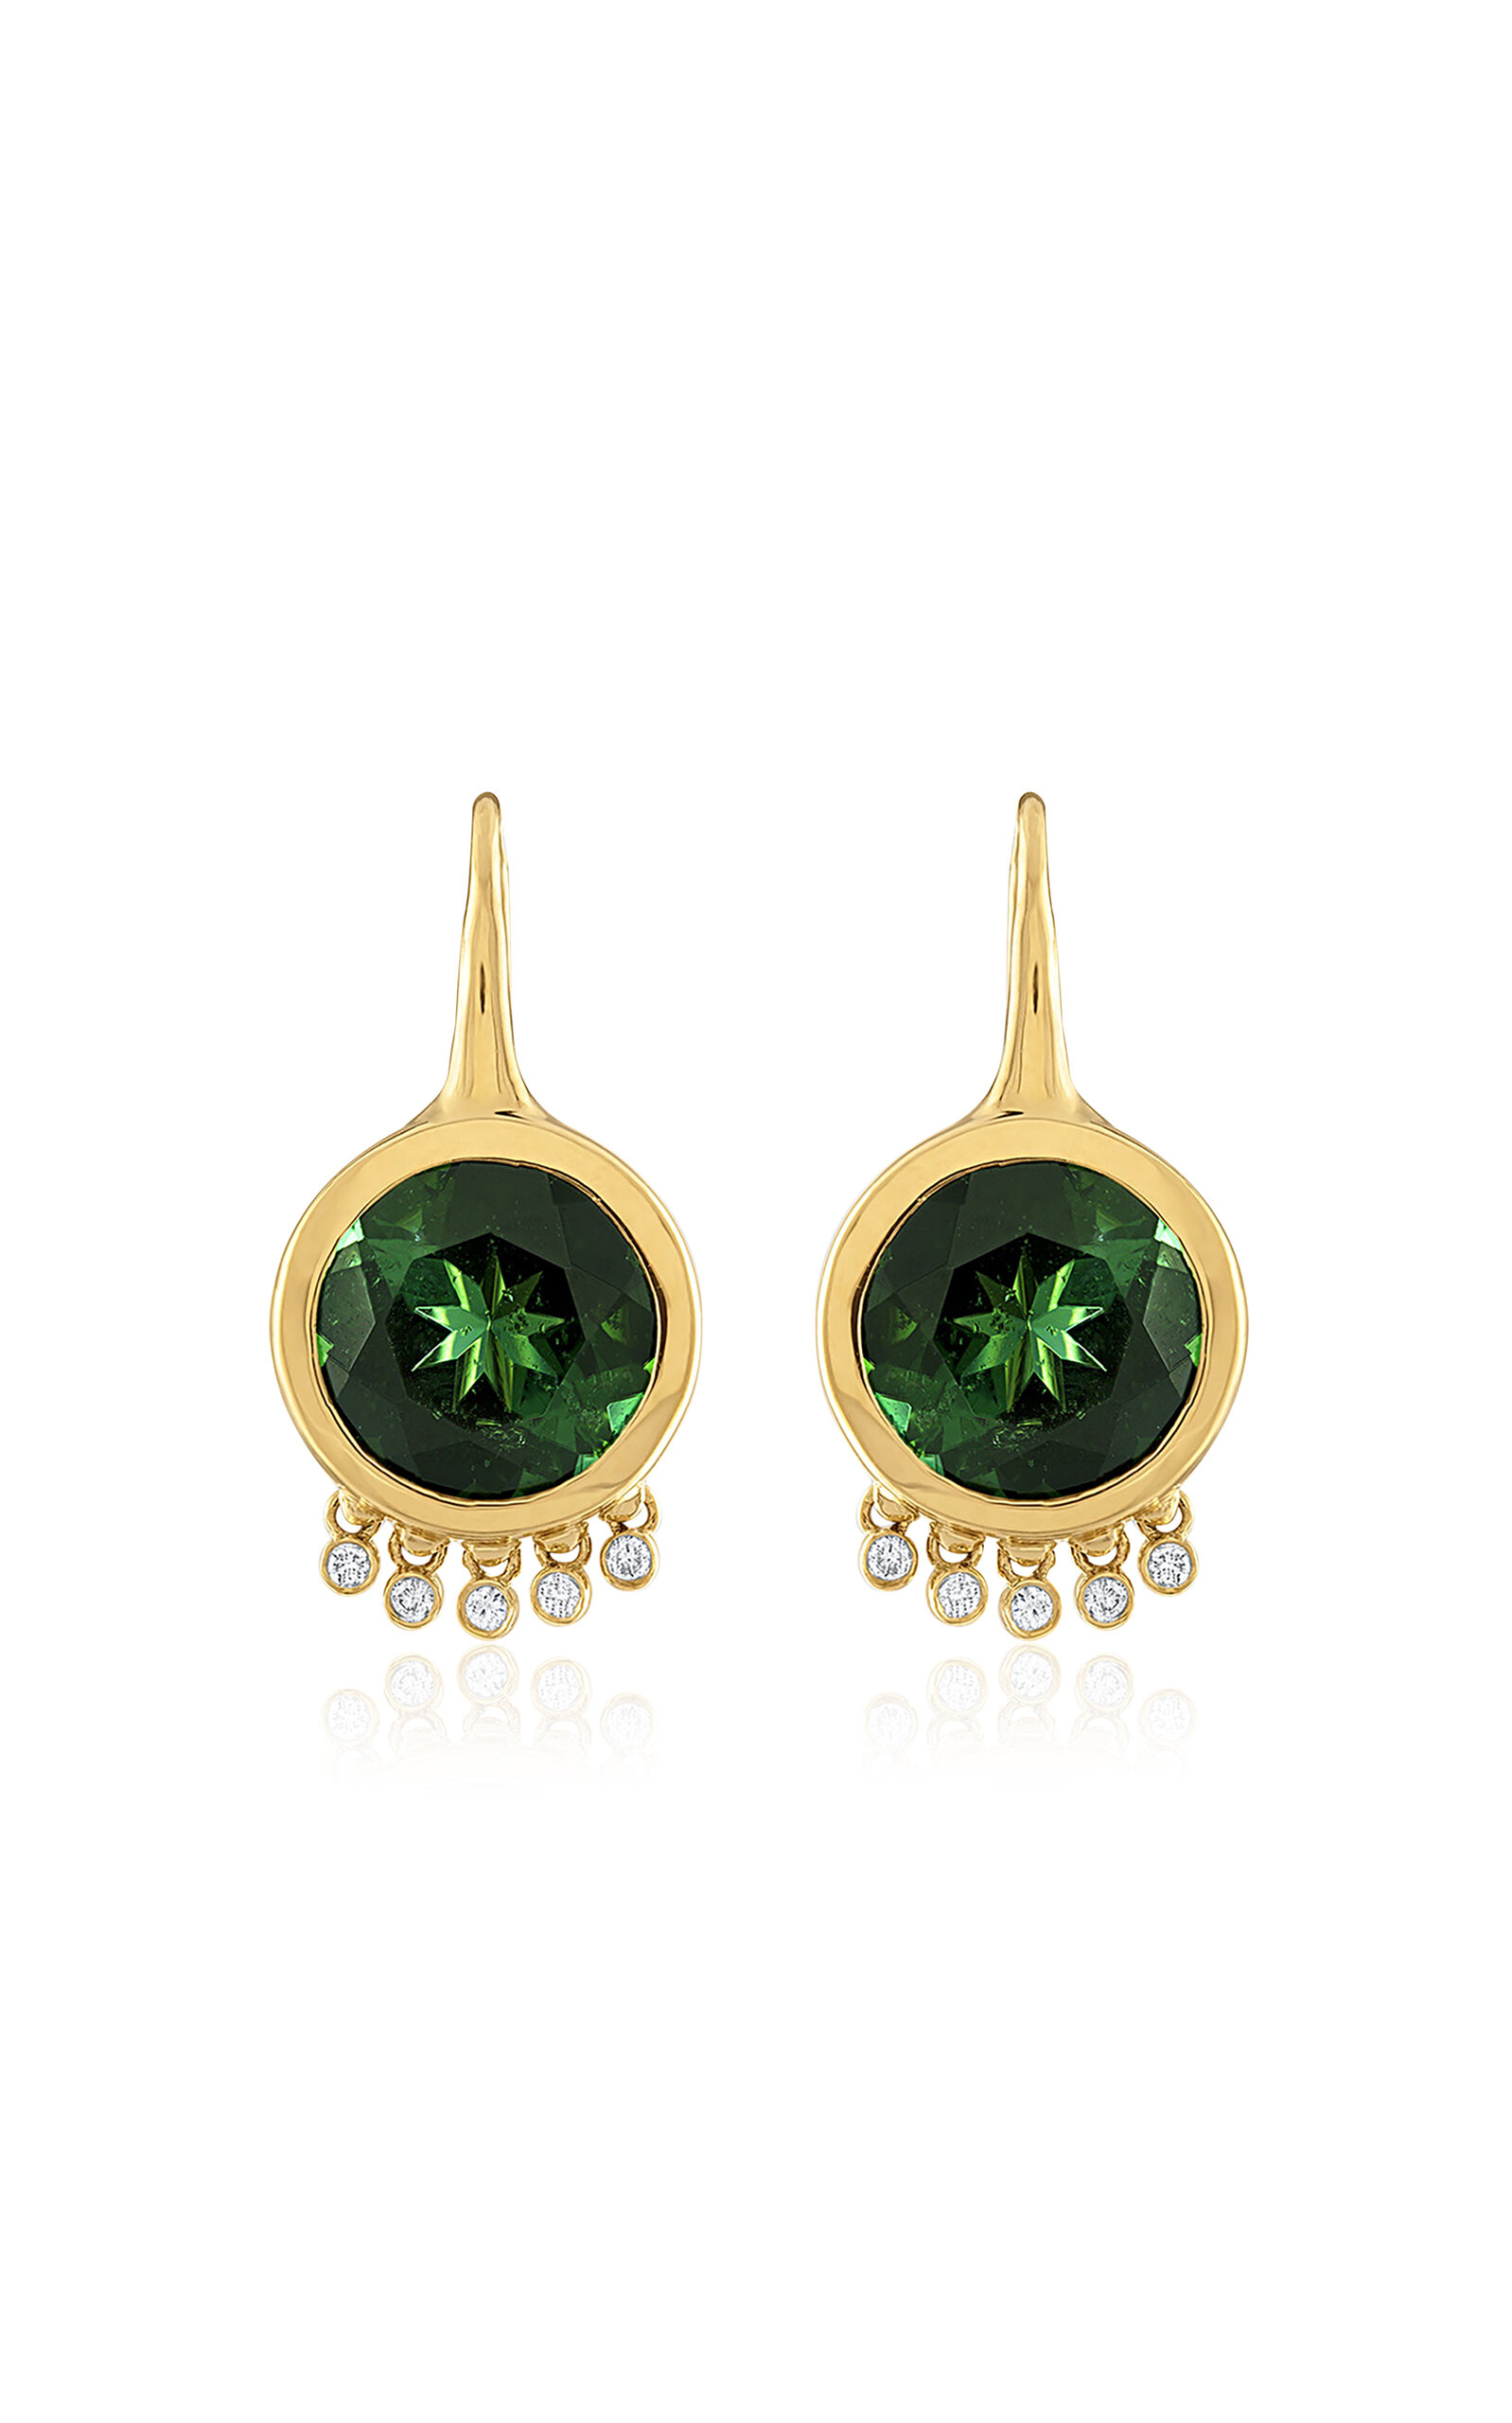 18k Yellow Gold Tennessee Drop Earrings Round with Green Tourmaline